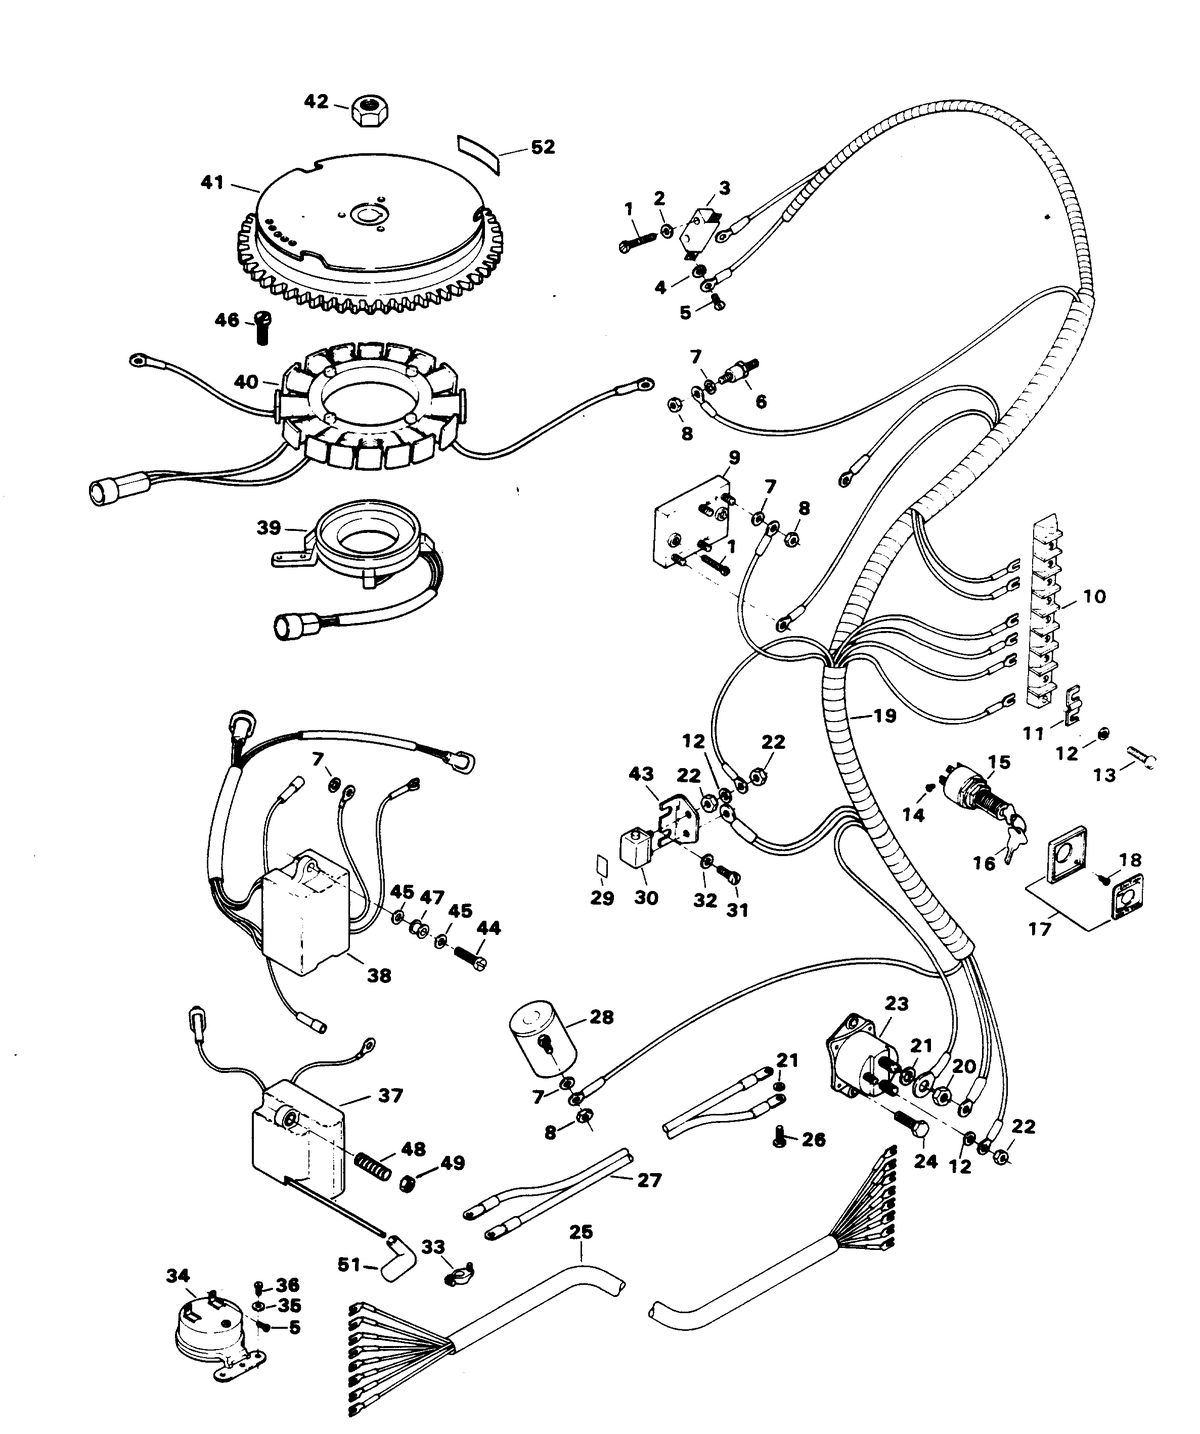 CHRYSLER 55 H.P. ELECTRICAL COMPONENTS